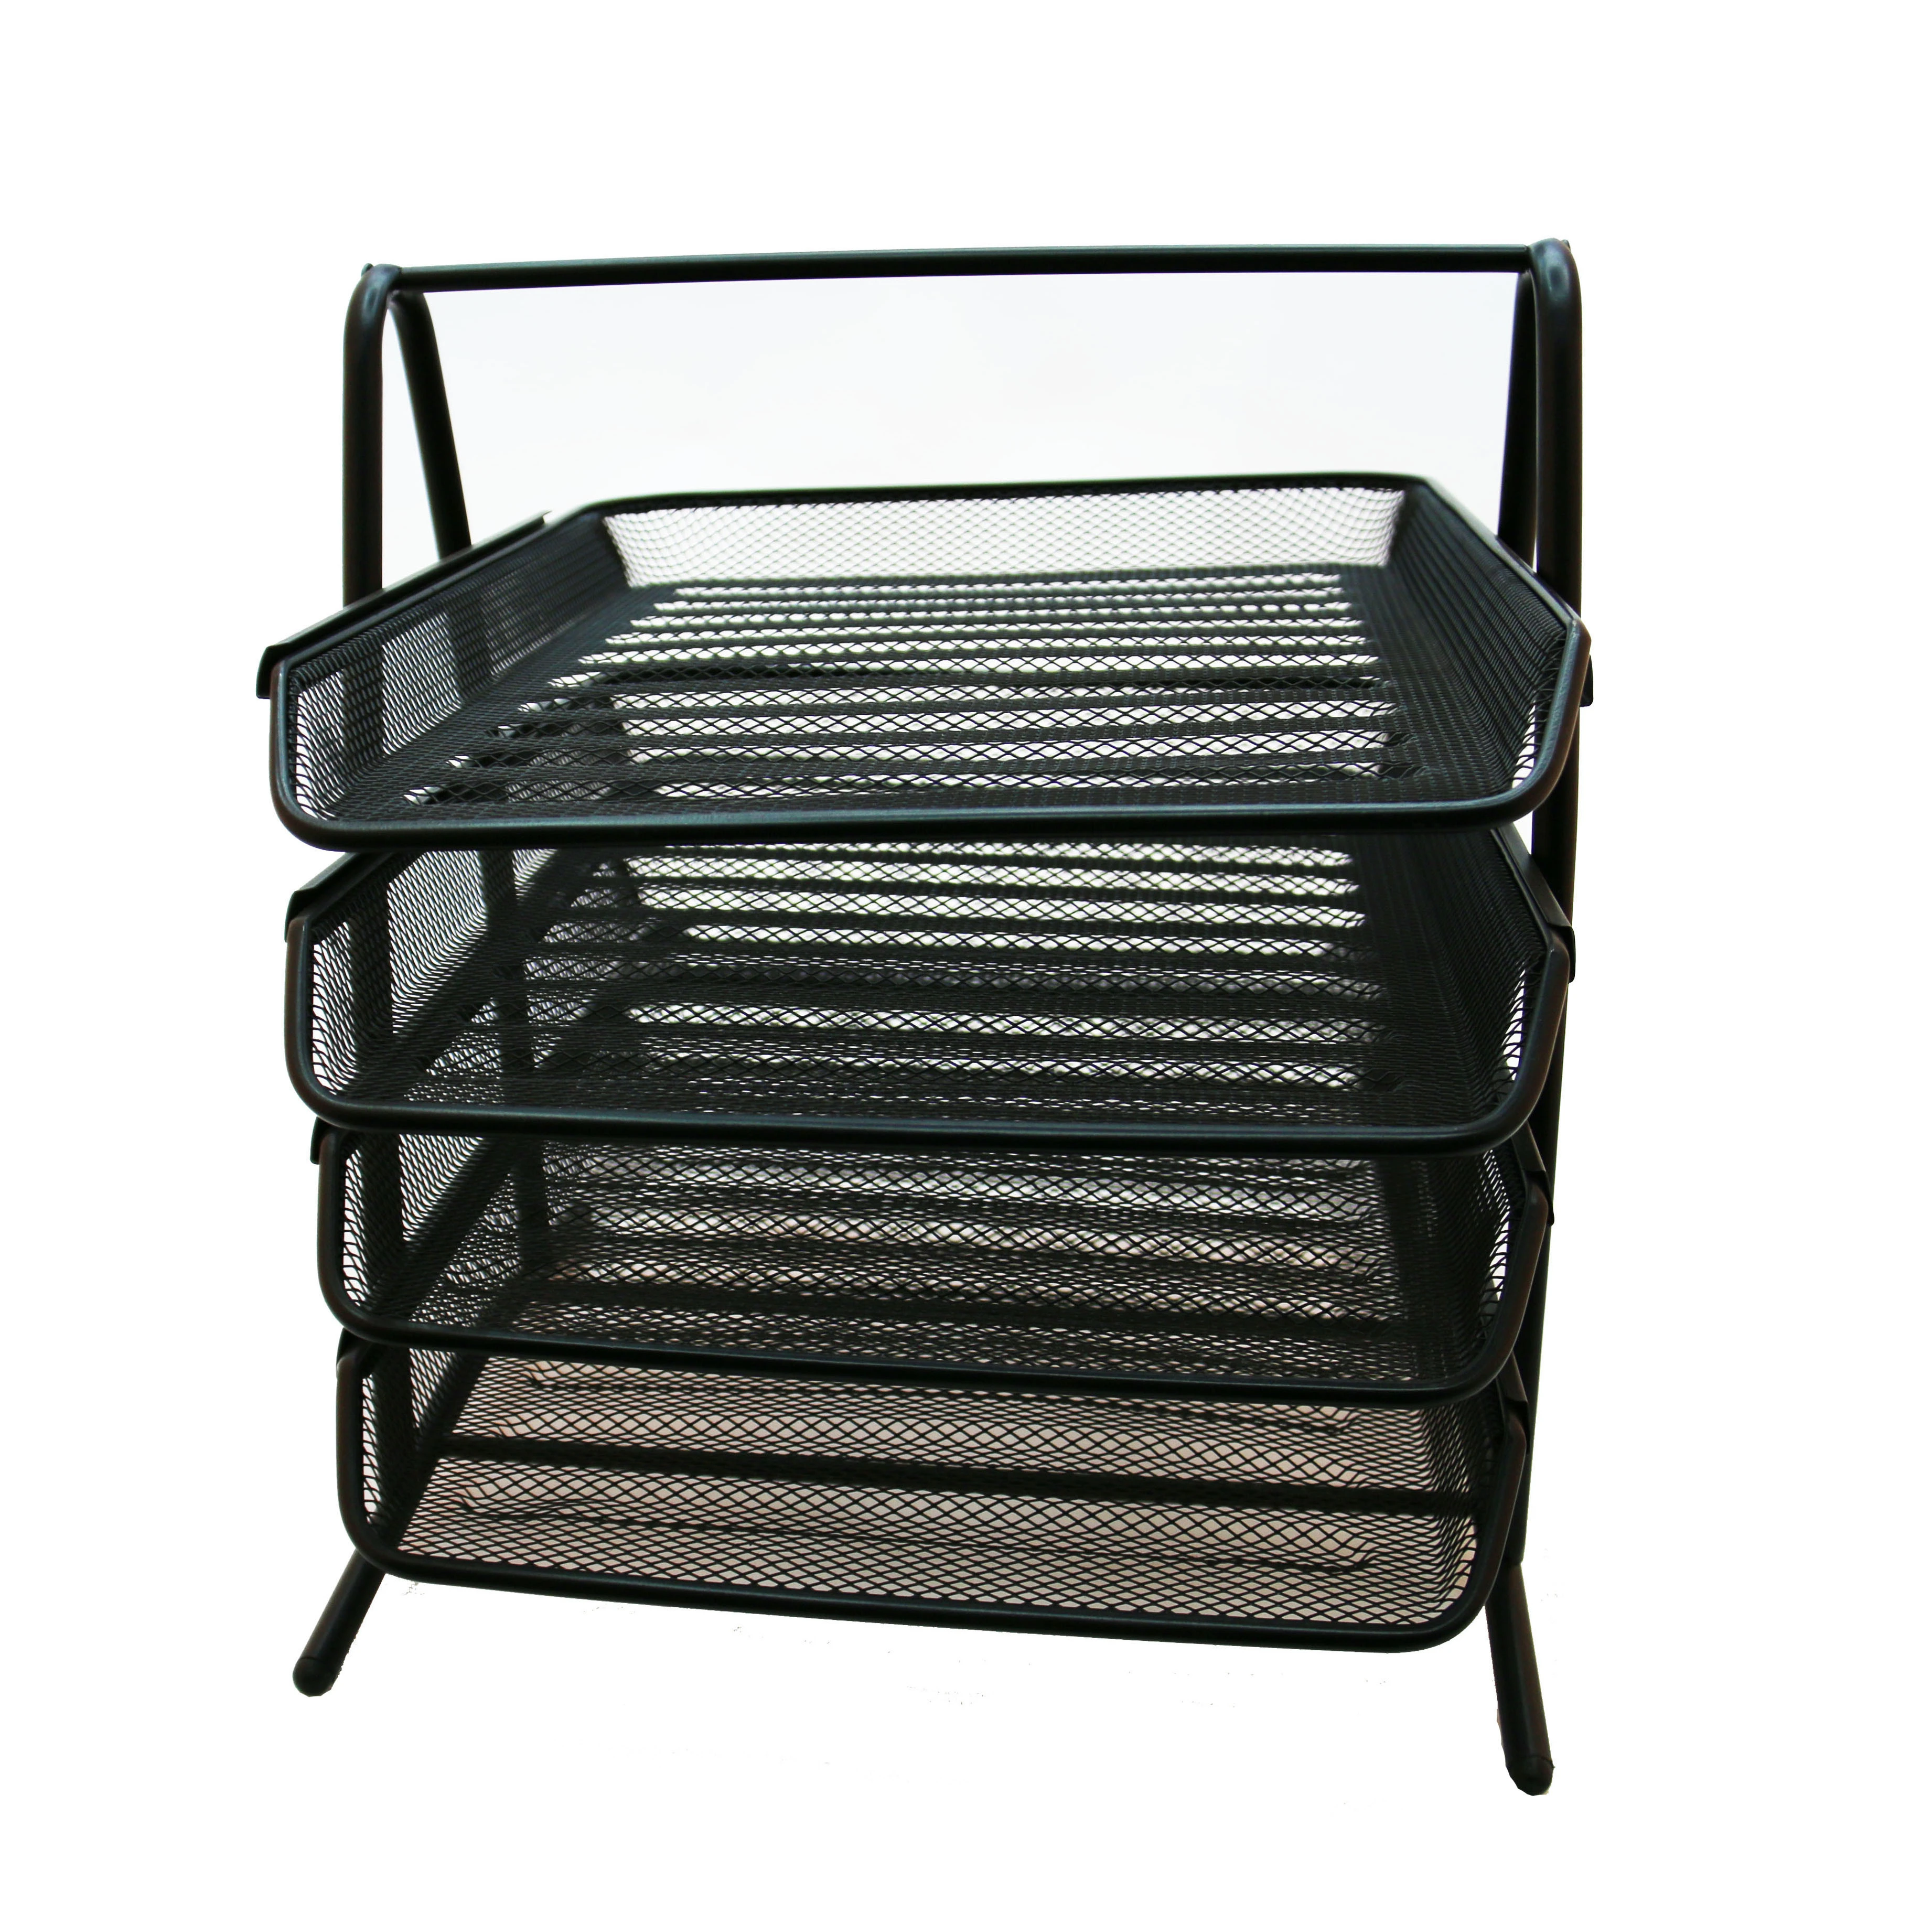 4-Tier Home Office Desk Organizer A4 Paper Document File Tray Book Shelf Portable Metal Wire Mesh Storage Holder